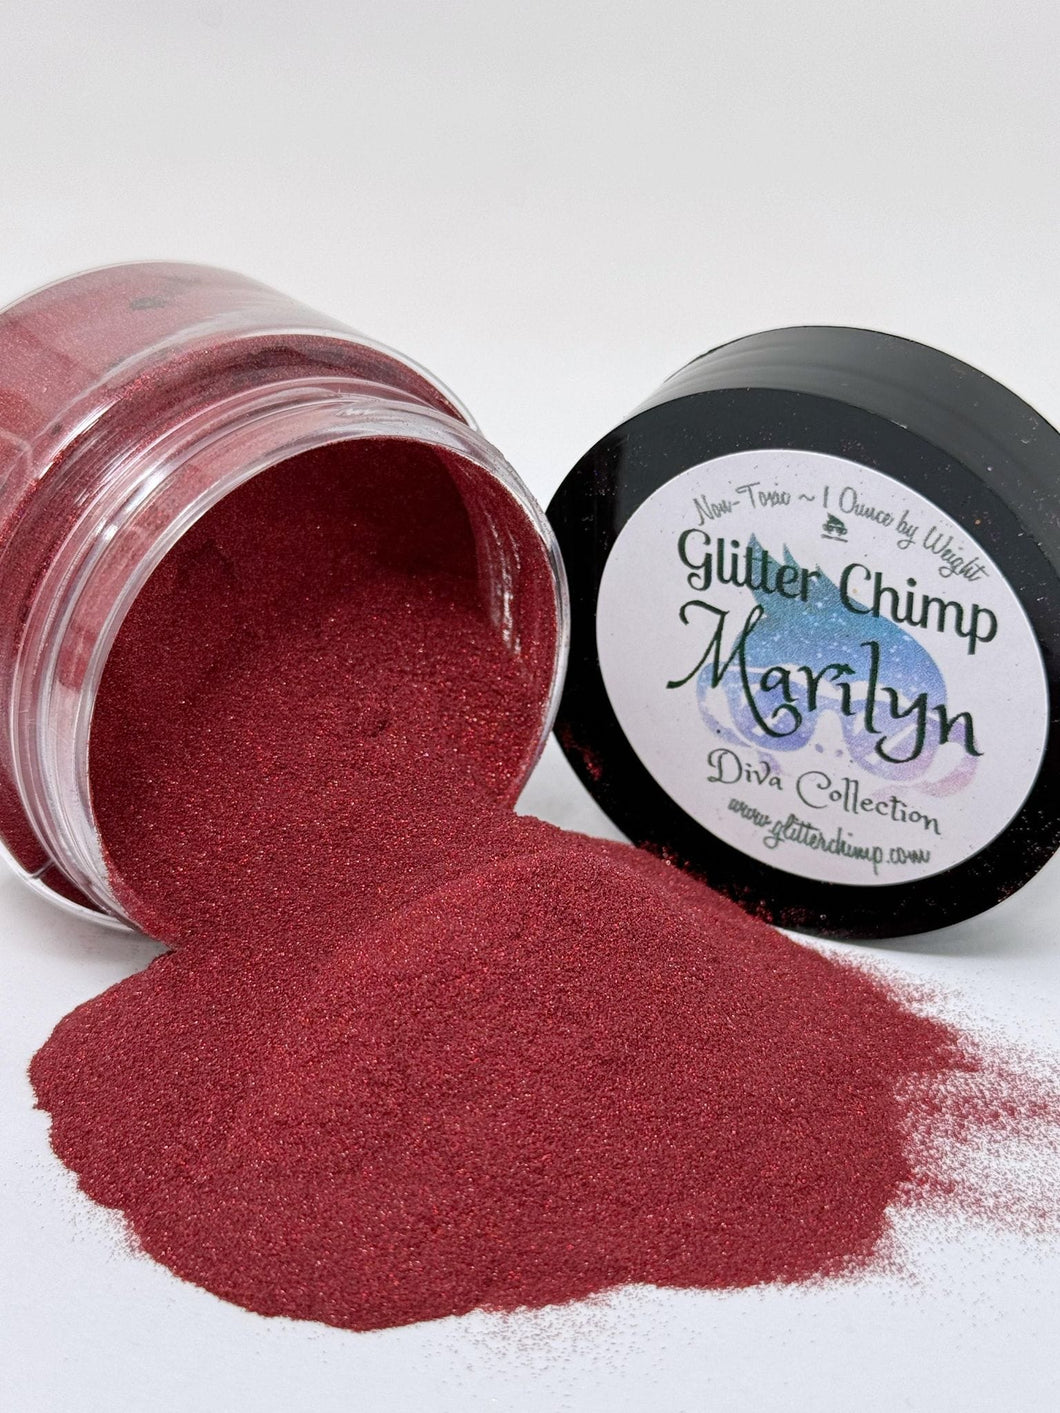 Marilyn - The Diva Collection Glitter